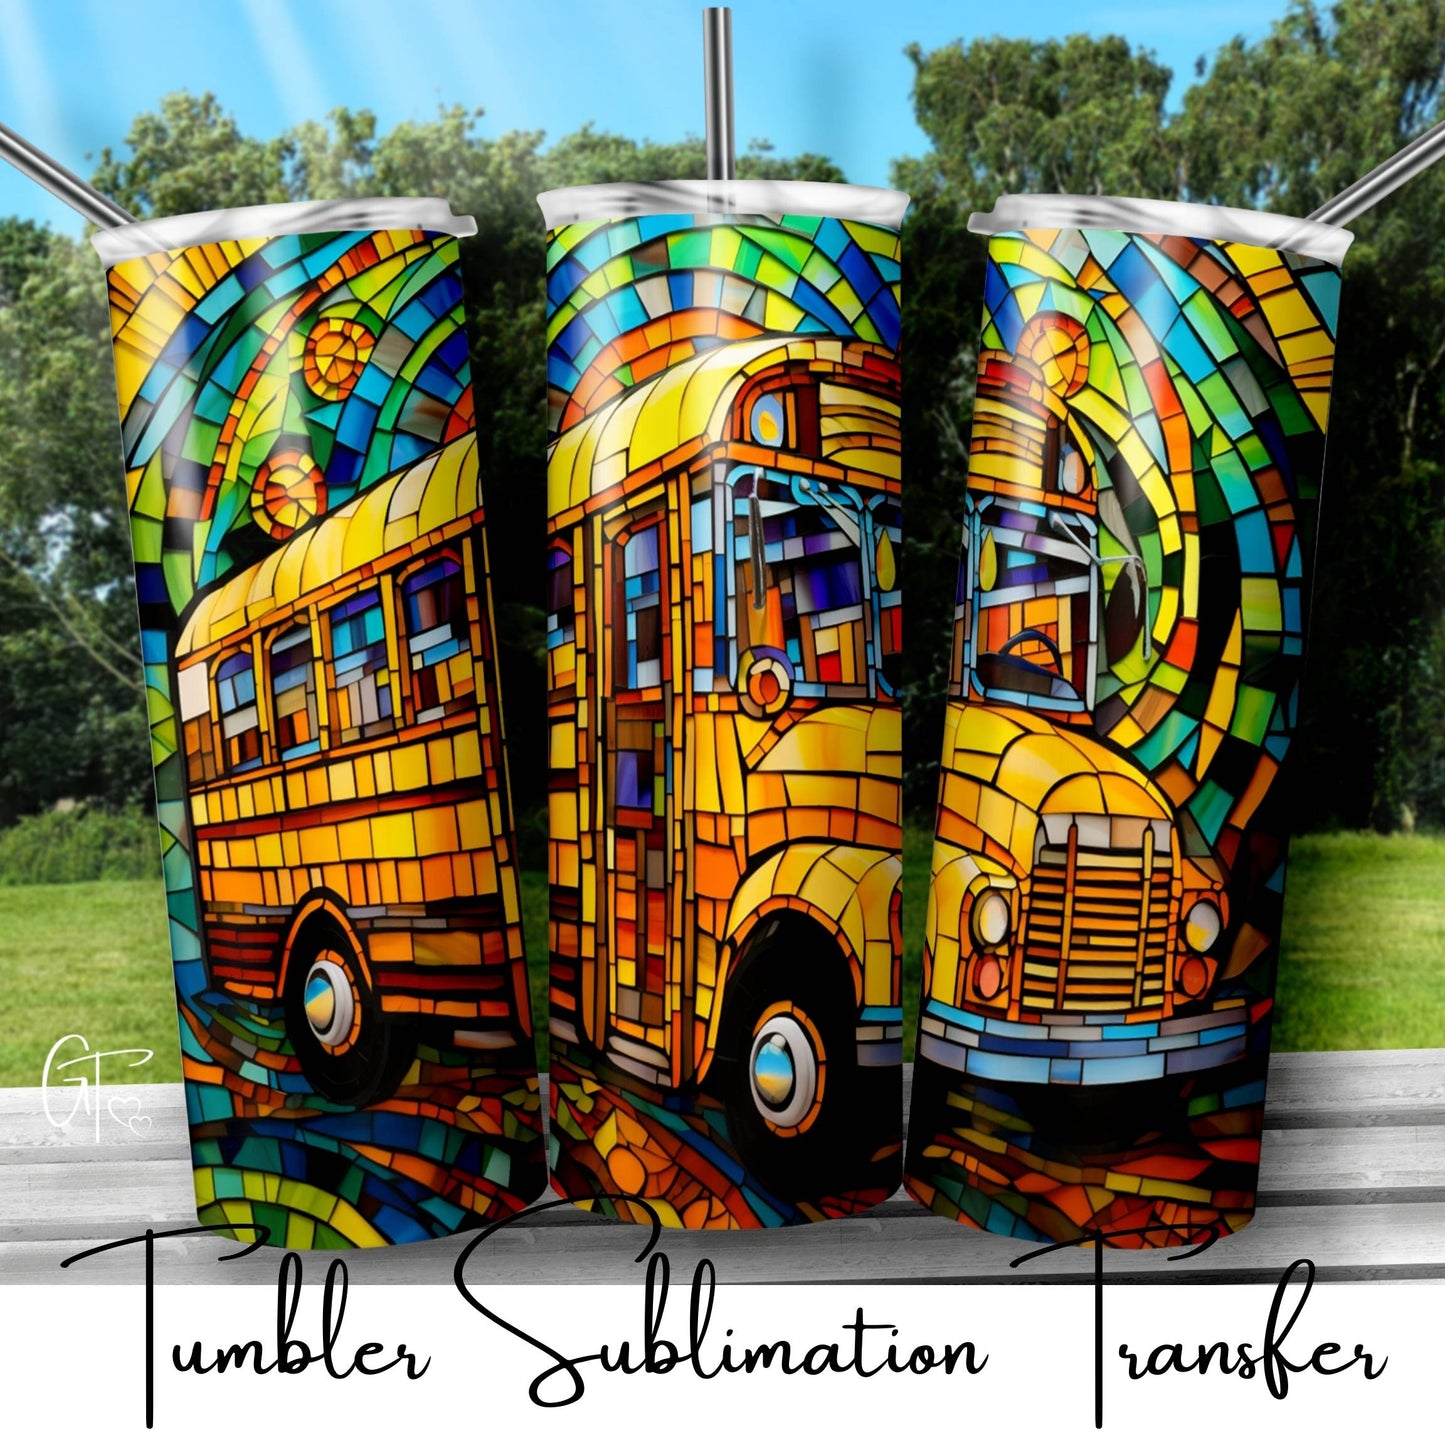 SUB1956 Stained Glass School Bus Driver 20 Tumbler Sublimation Transfer